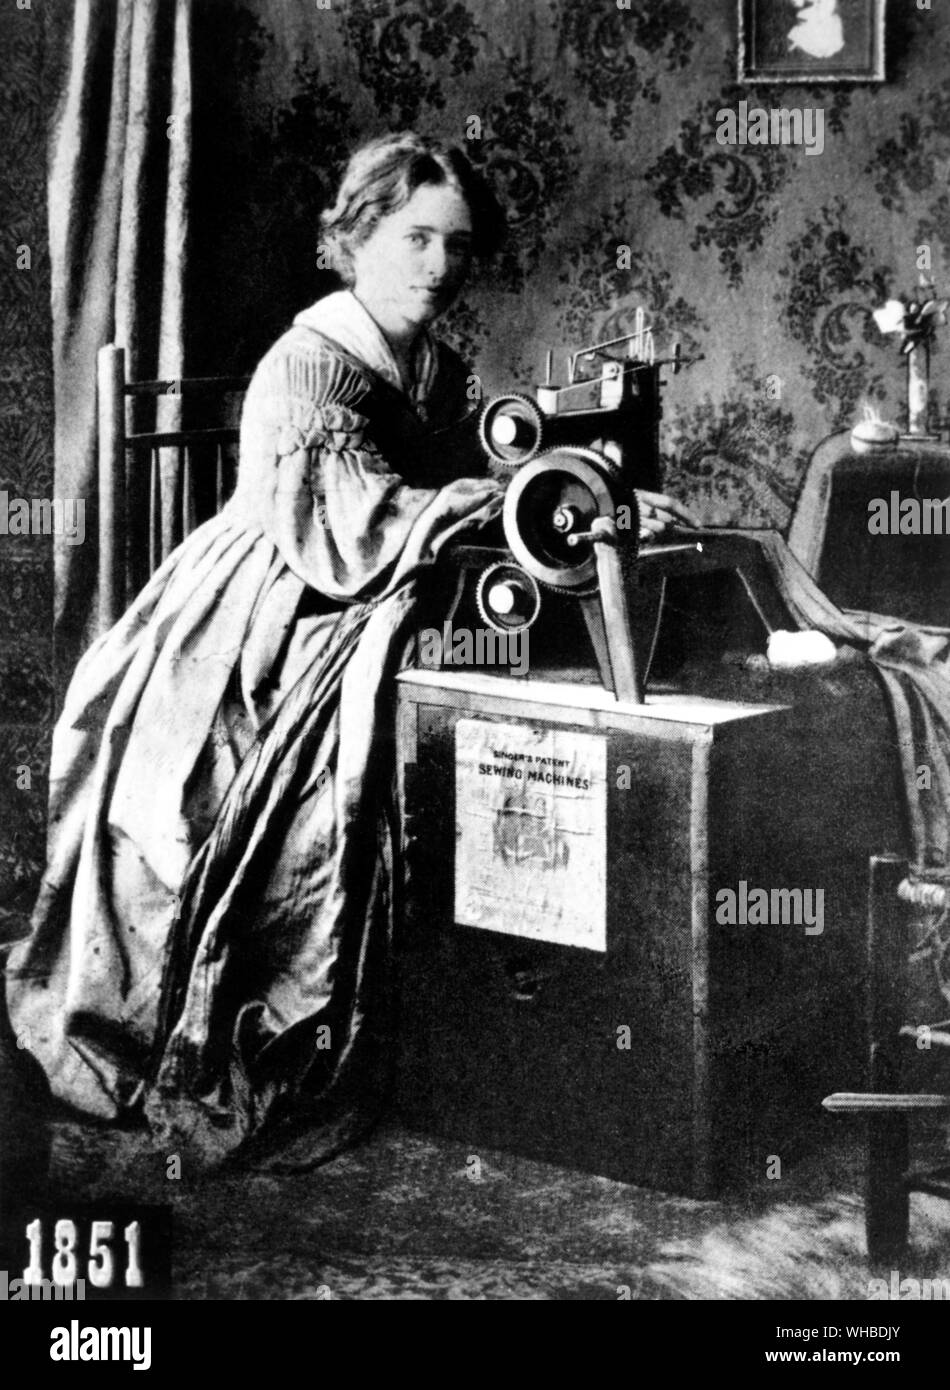 Mechanization invades the home Singer sewing-machine 1851.. Stock Photo